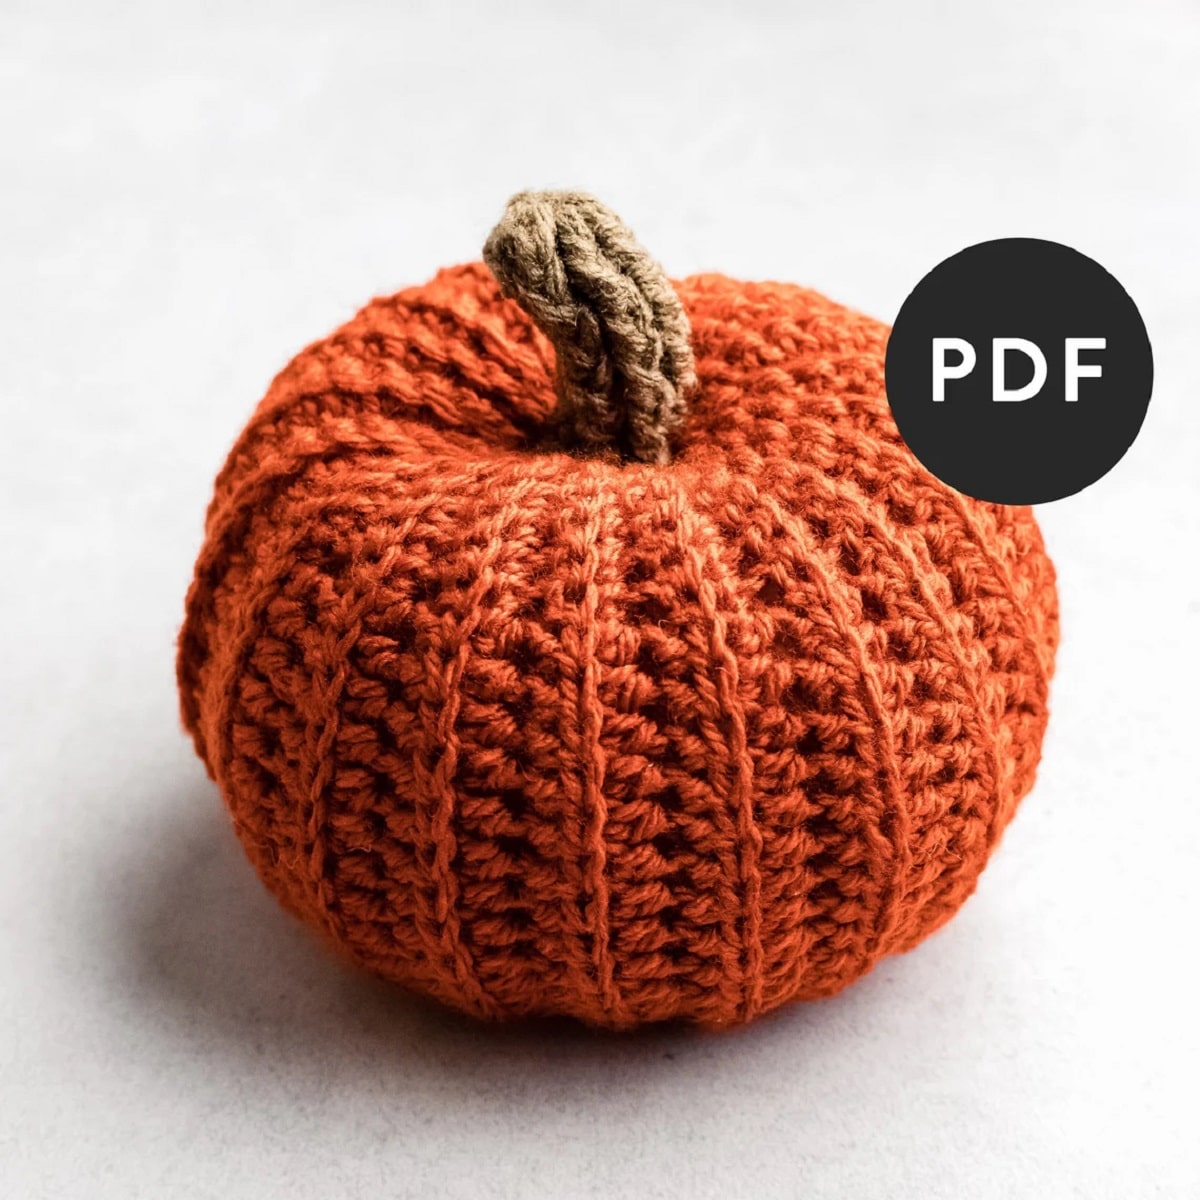 A small brown ribbed crochet pumpkin with a brown stem in the middle on a white background.